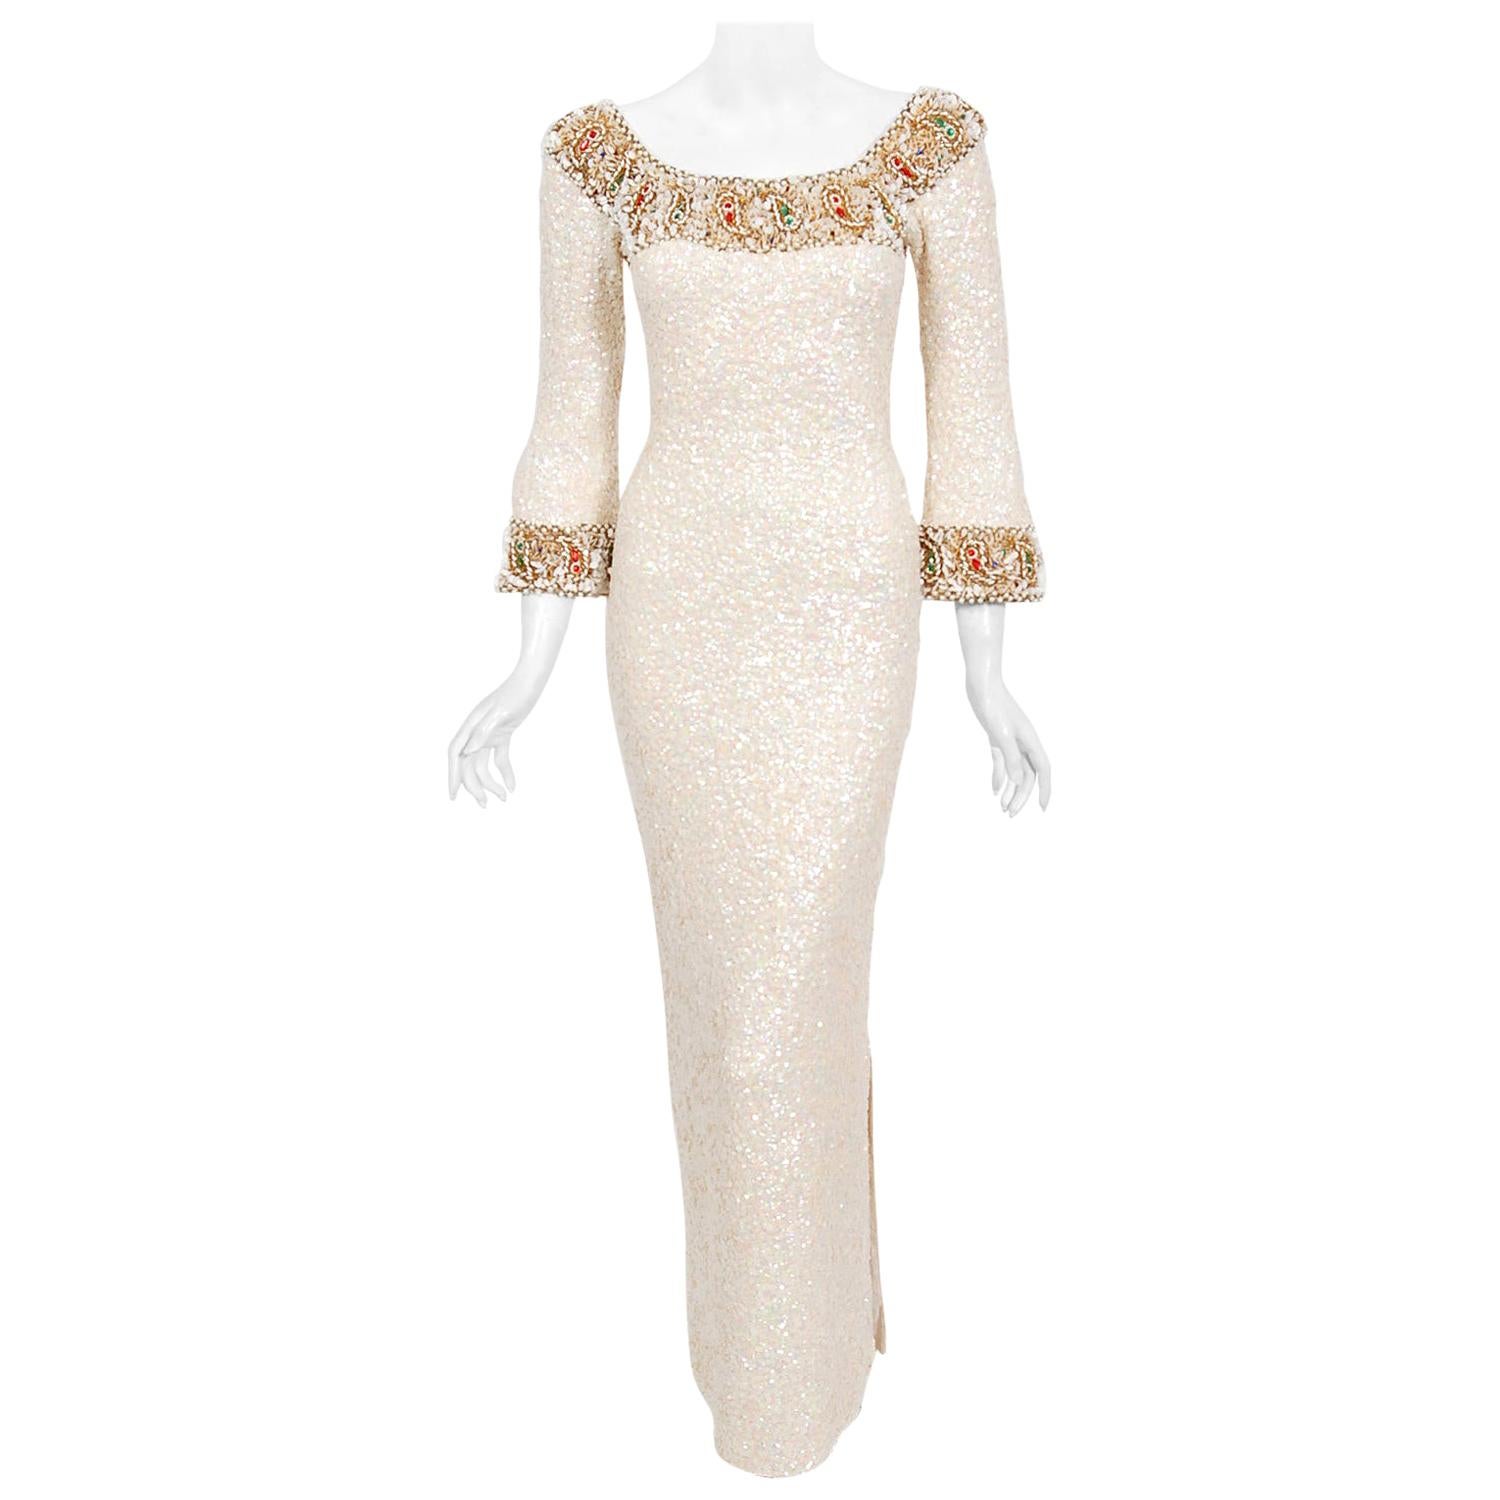 1960's Gene Shelly Ivory Creme Beaded Sequin Wool Knit Scoopneck Hourglass Gown